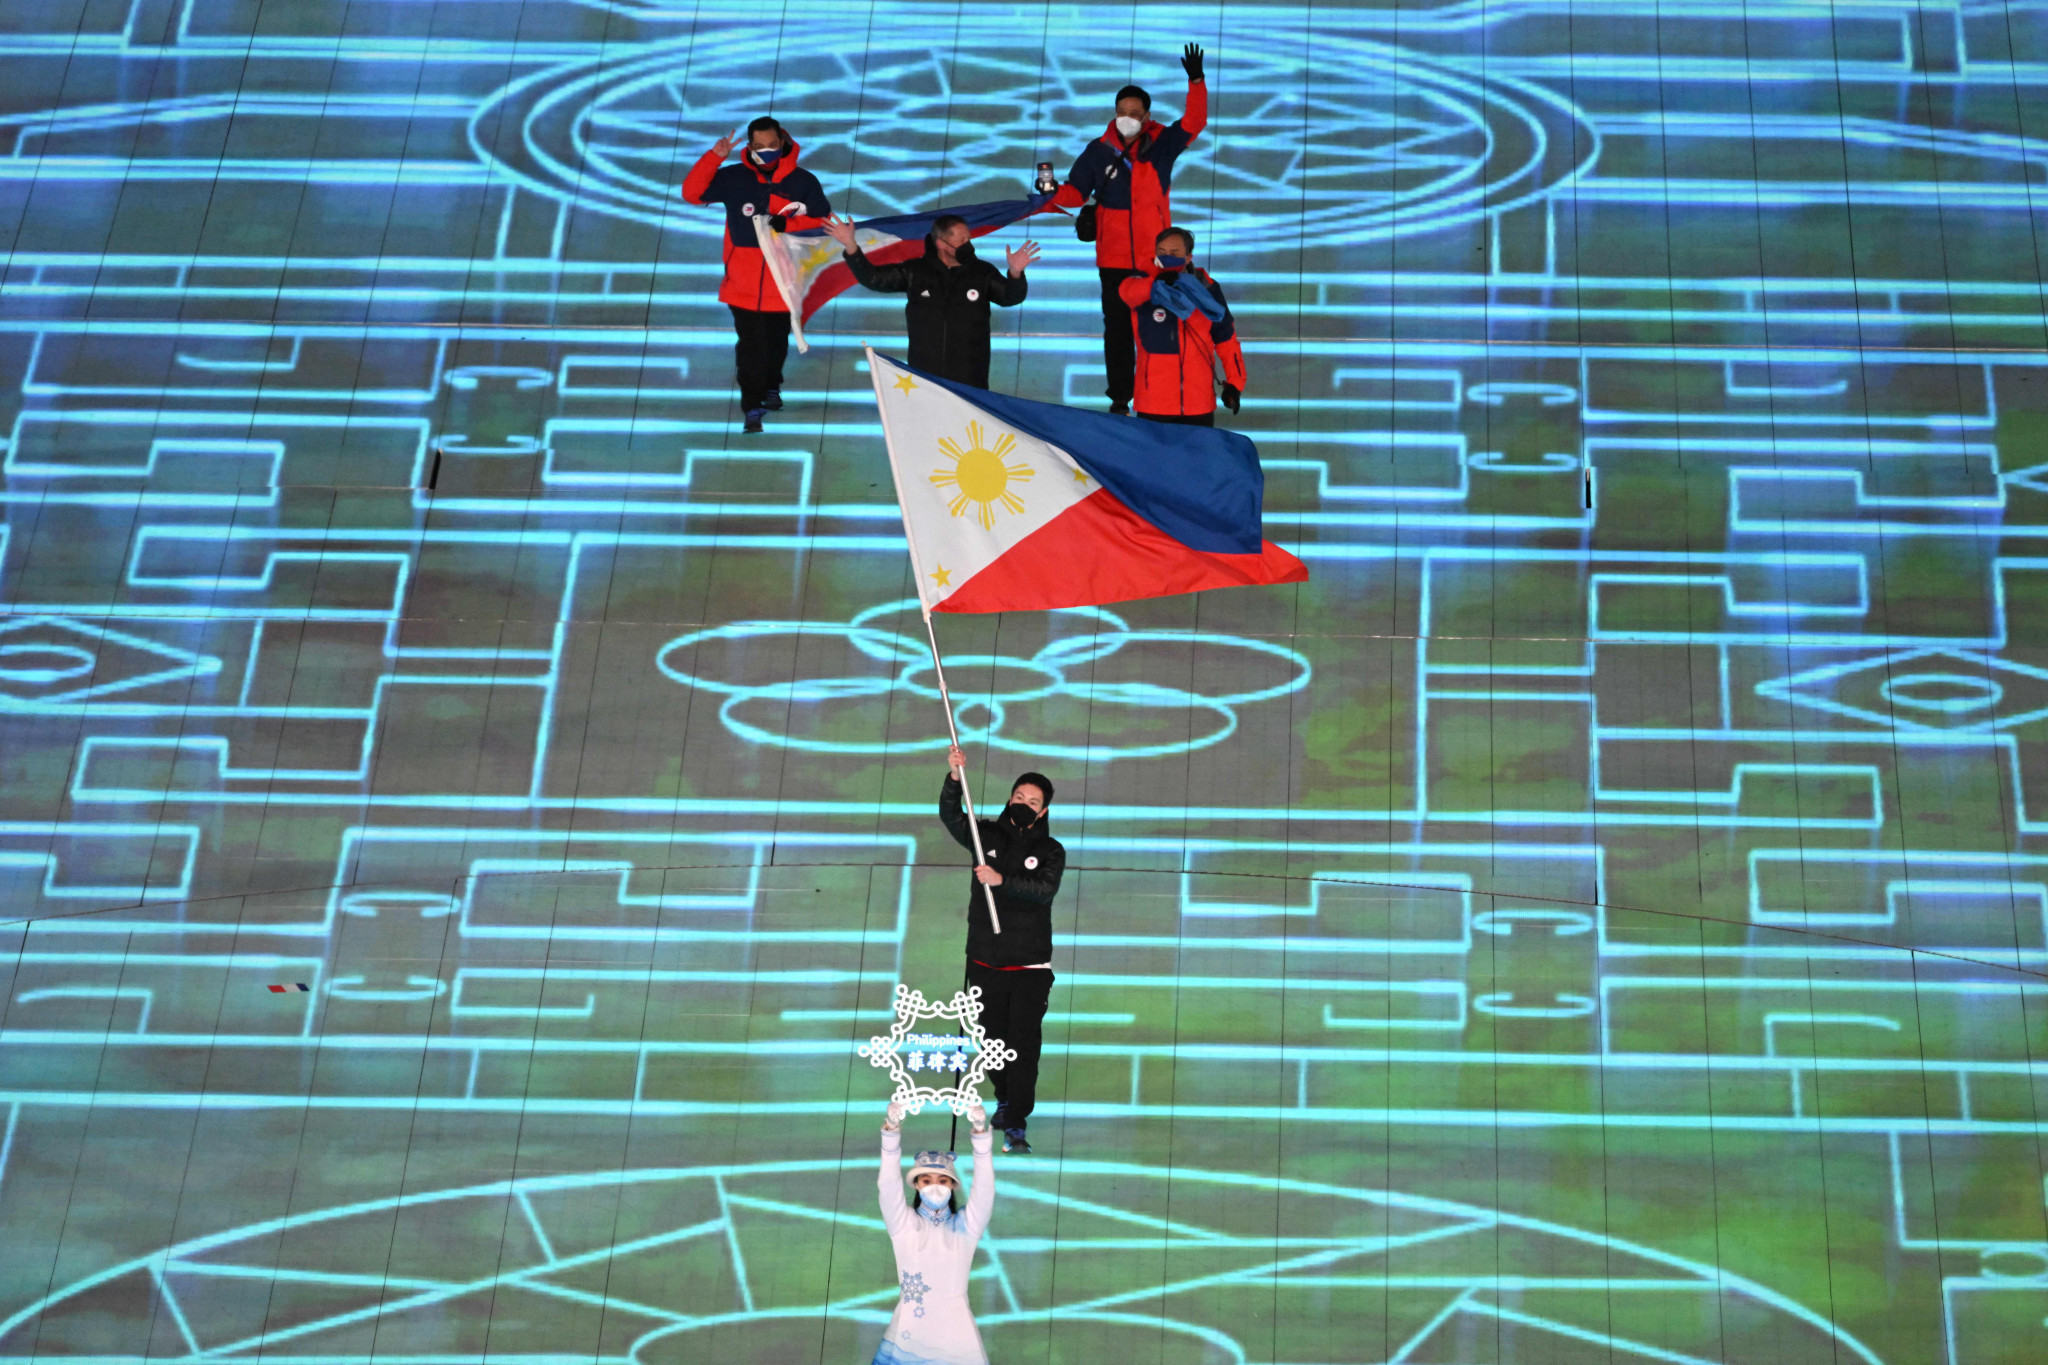 The Philippines will hope Groseclose can help to improve on their performance at the 2020 Youth Olympic Games, where they failed to win a medal ©Getty Images